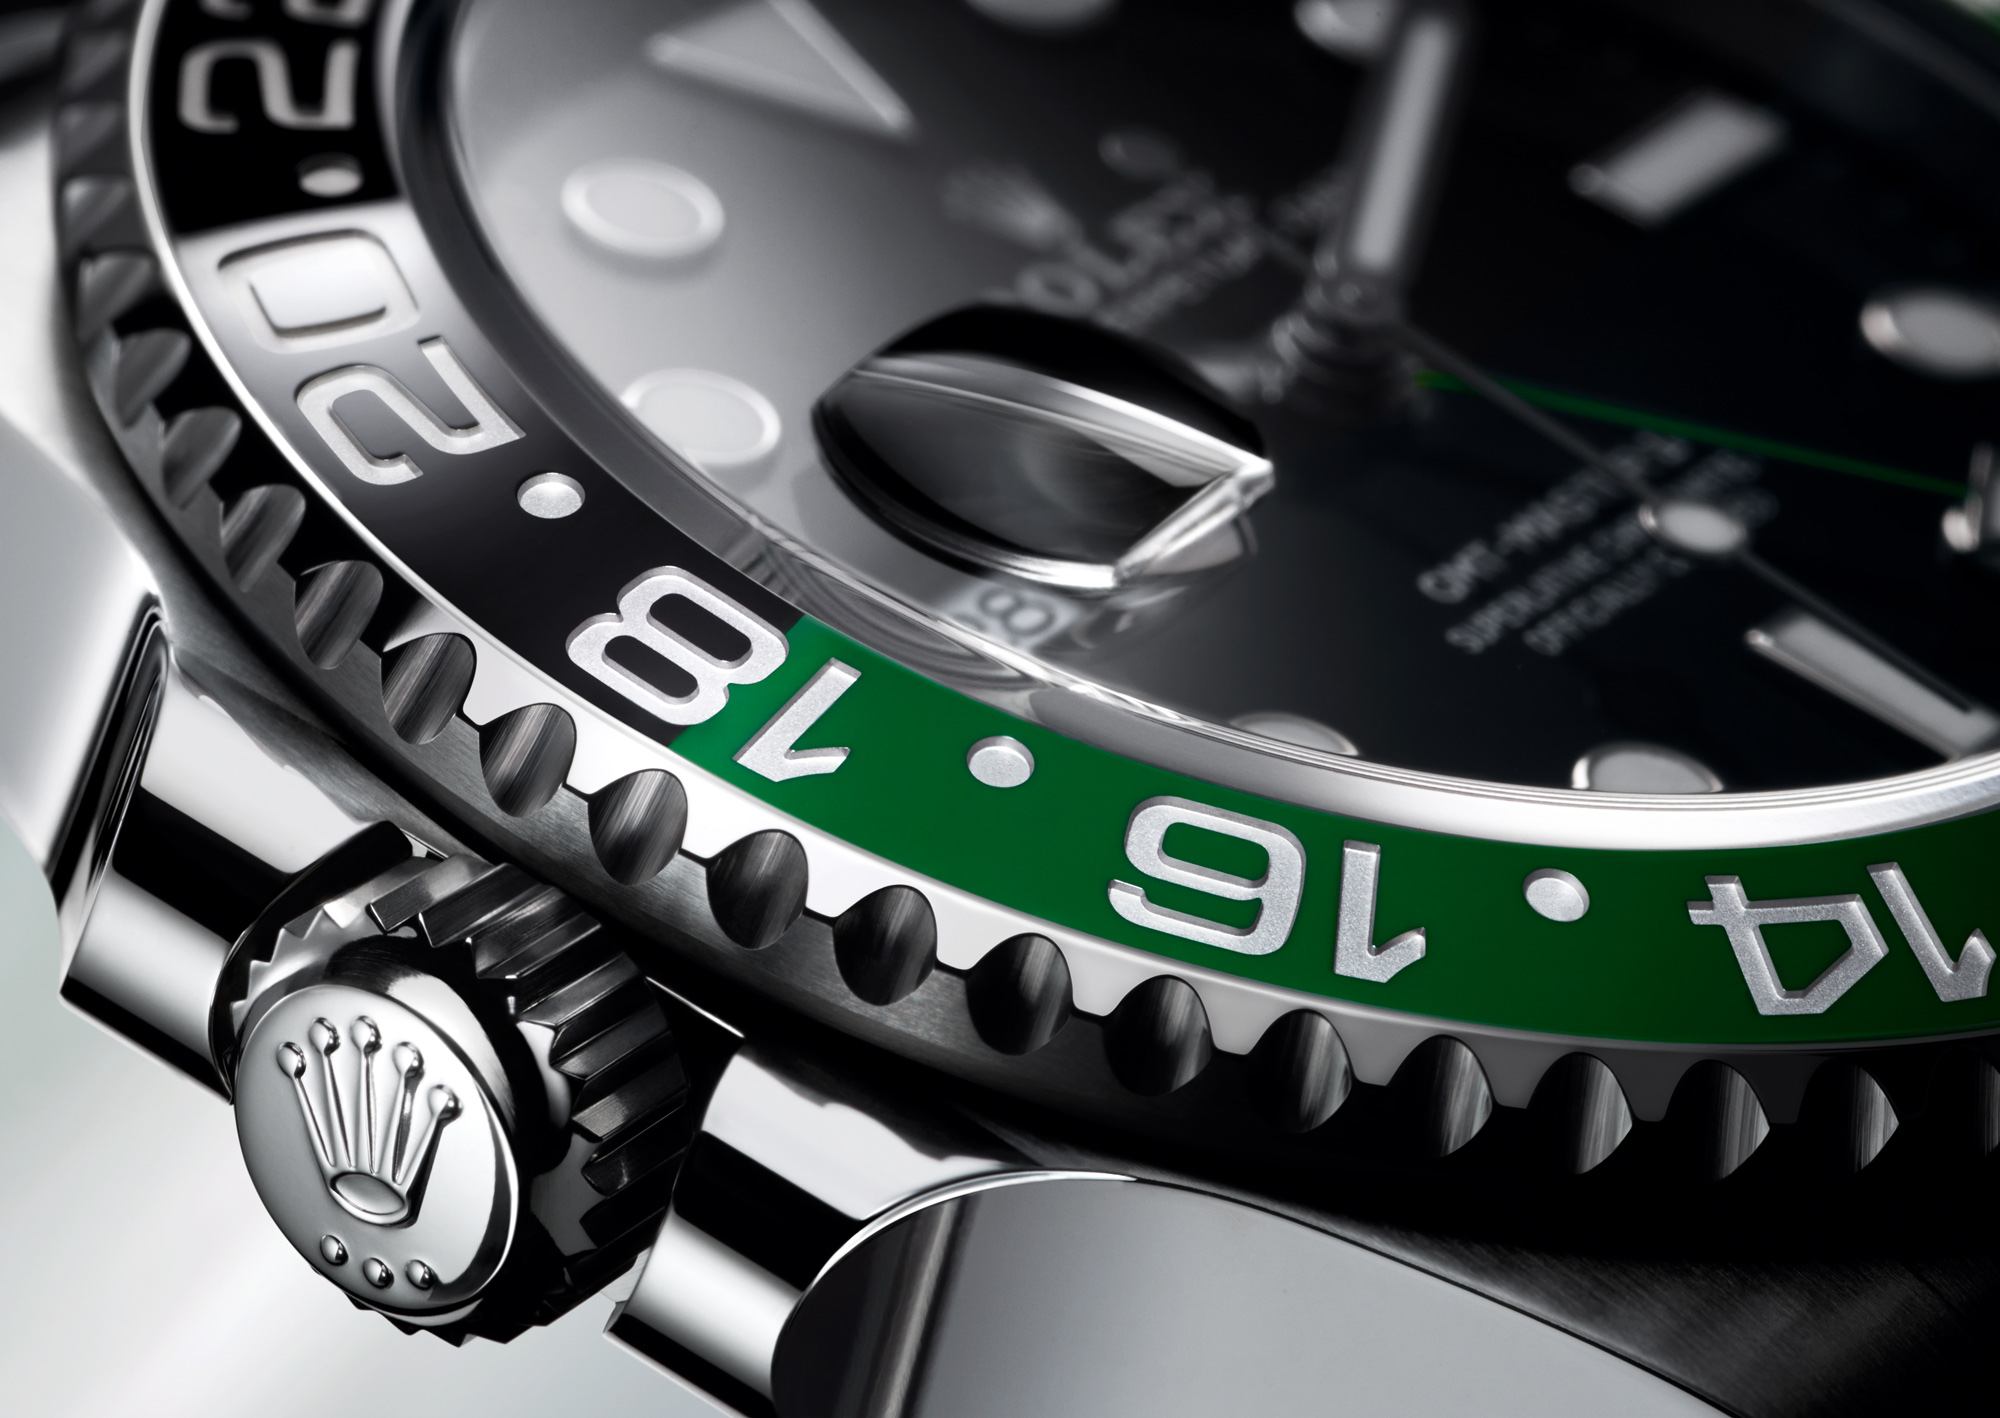 Rolex Sales: Pricey Luxury Swiss Watch Exports Jump to Record High on